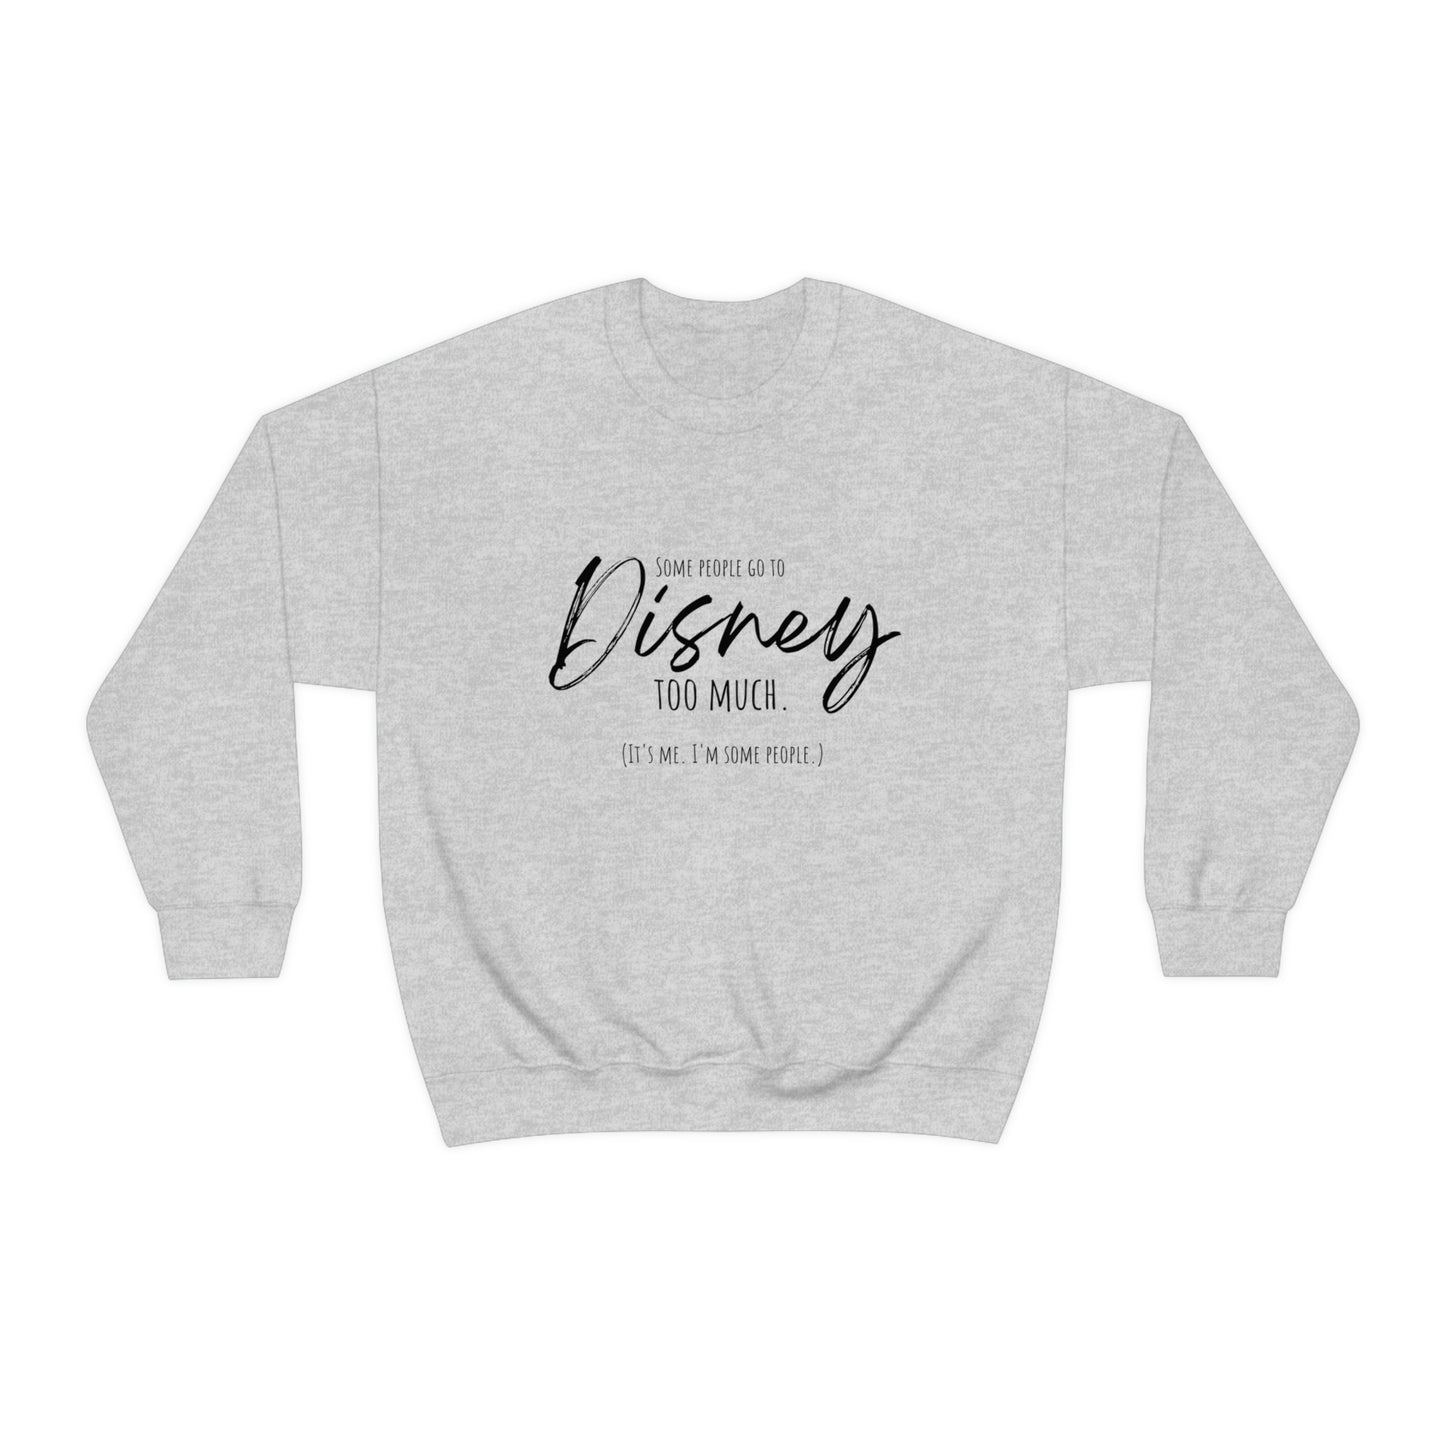 Some People go to Disney too much Sweatshirt | Adult Unisex